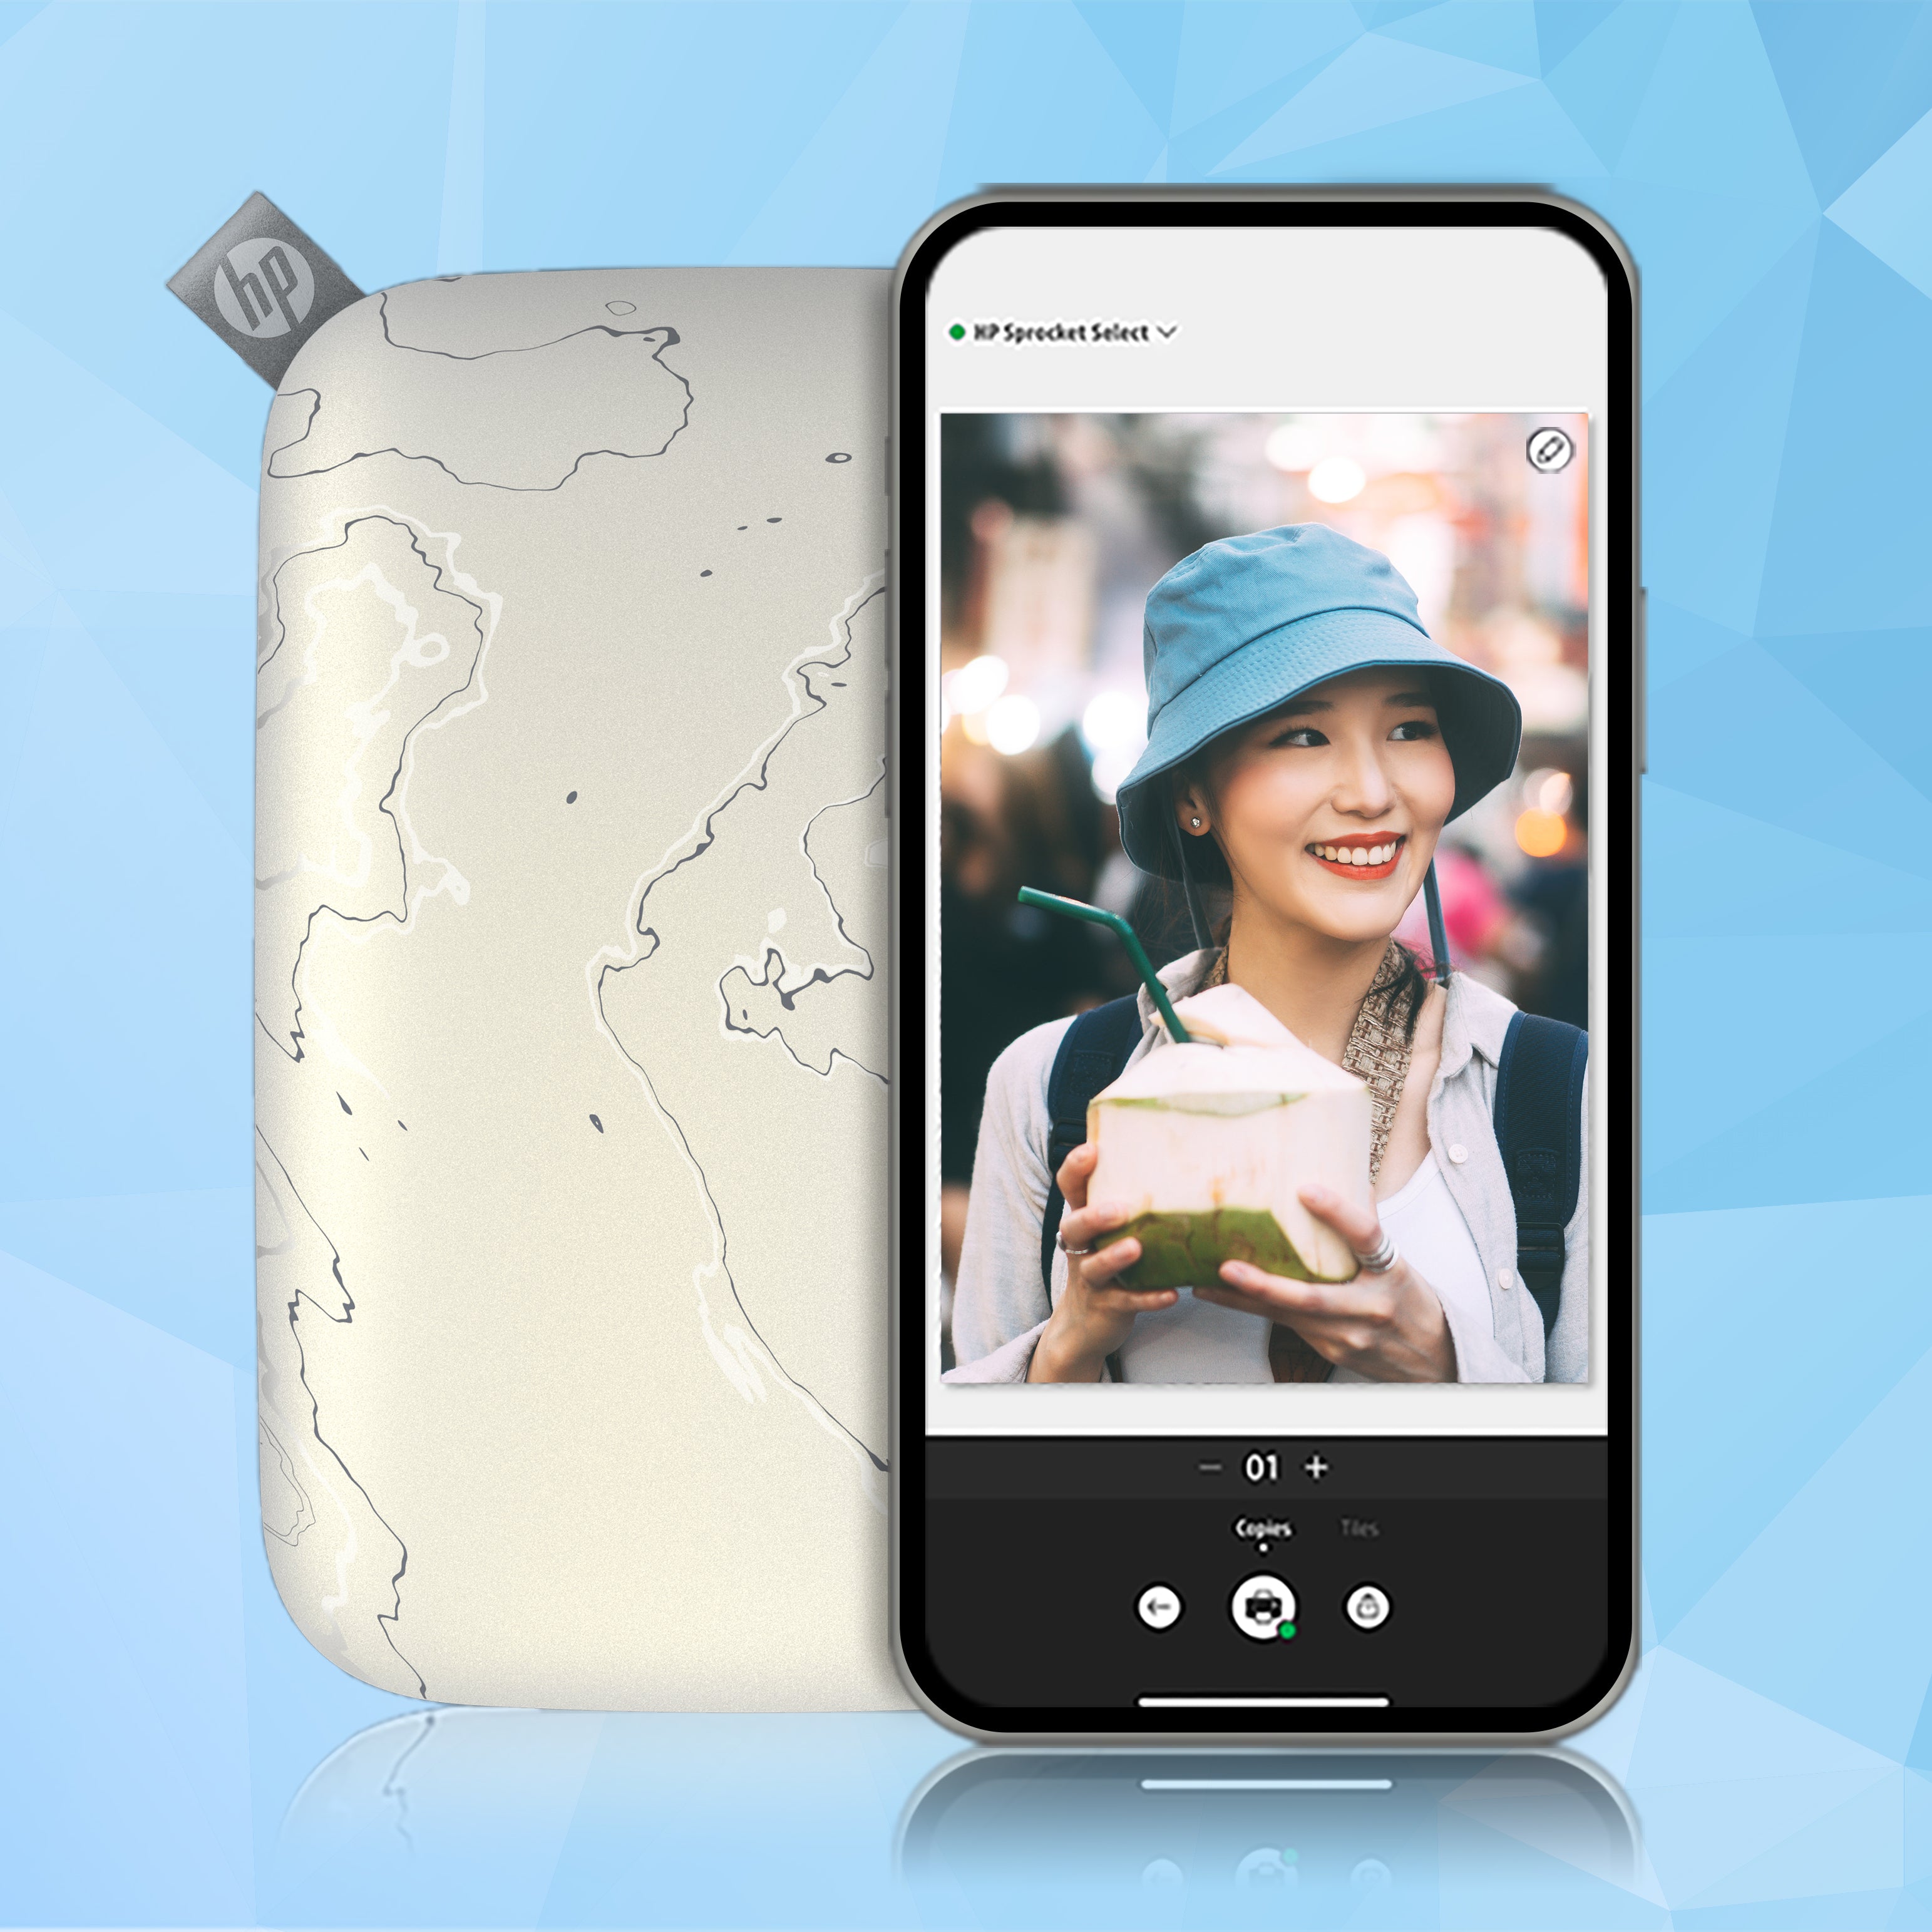 HP Sprocket Select Review: Easy-to-Use Mobile Photo Printer